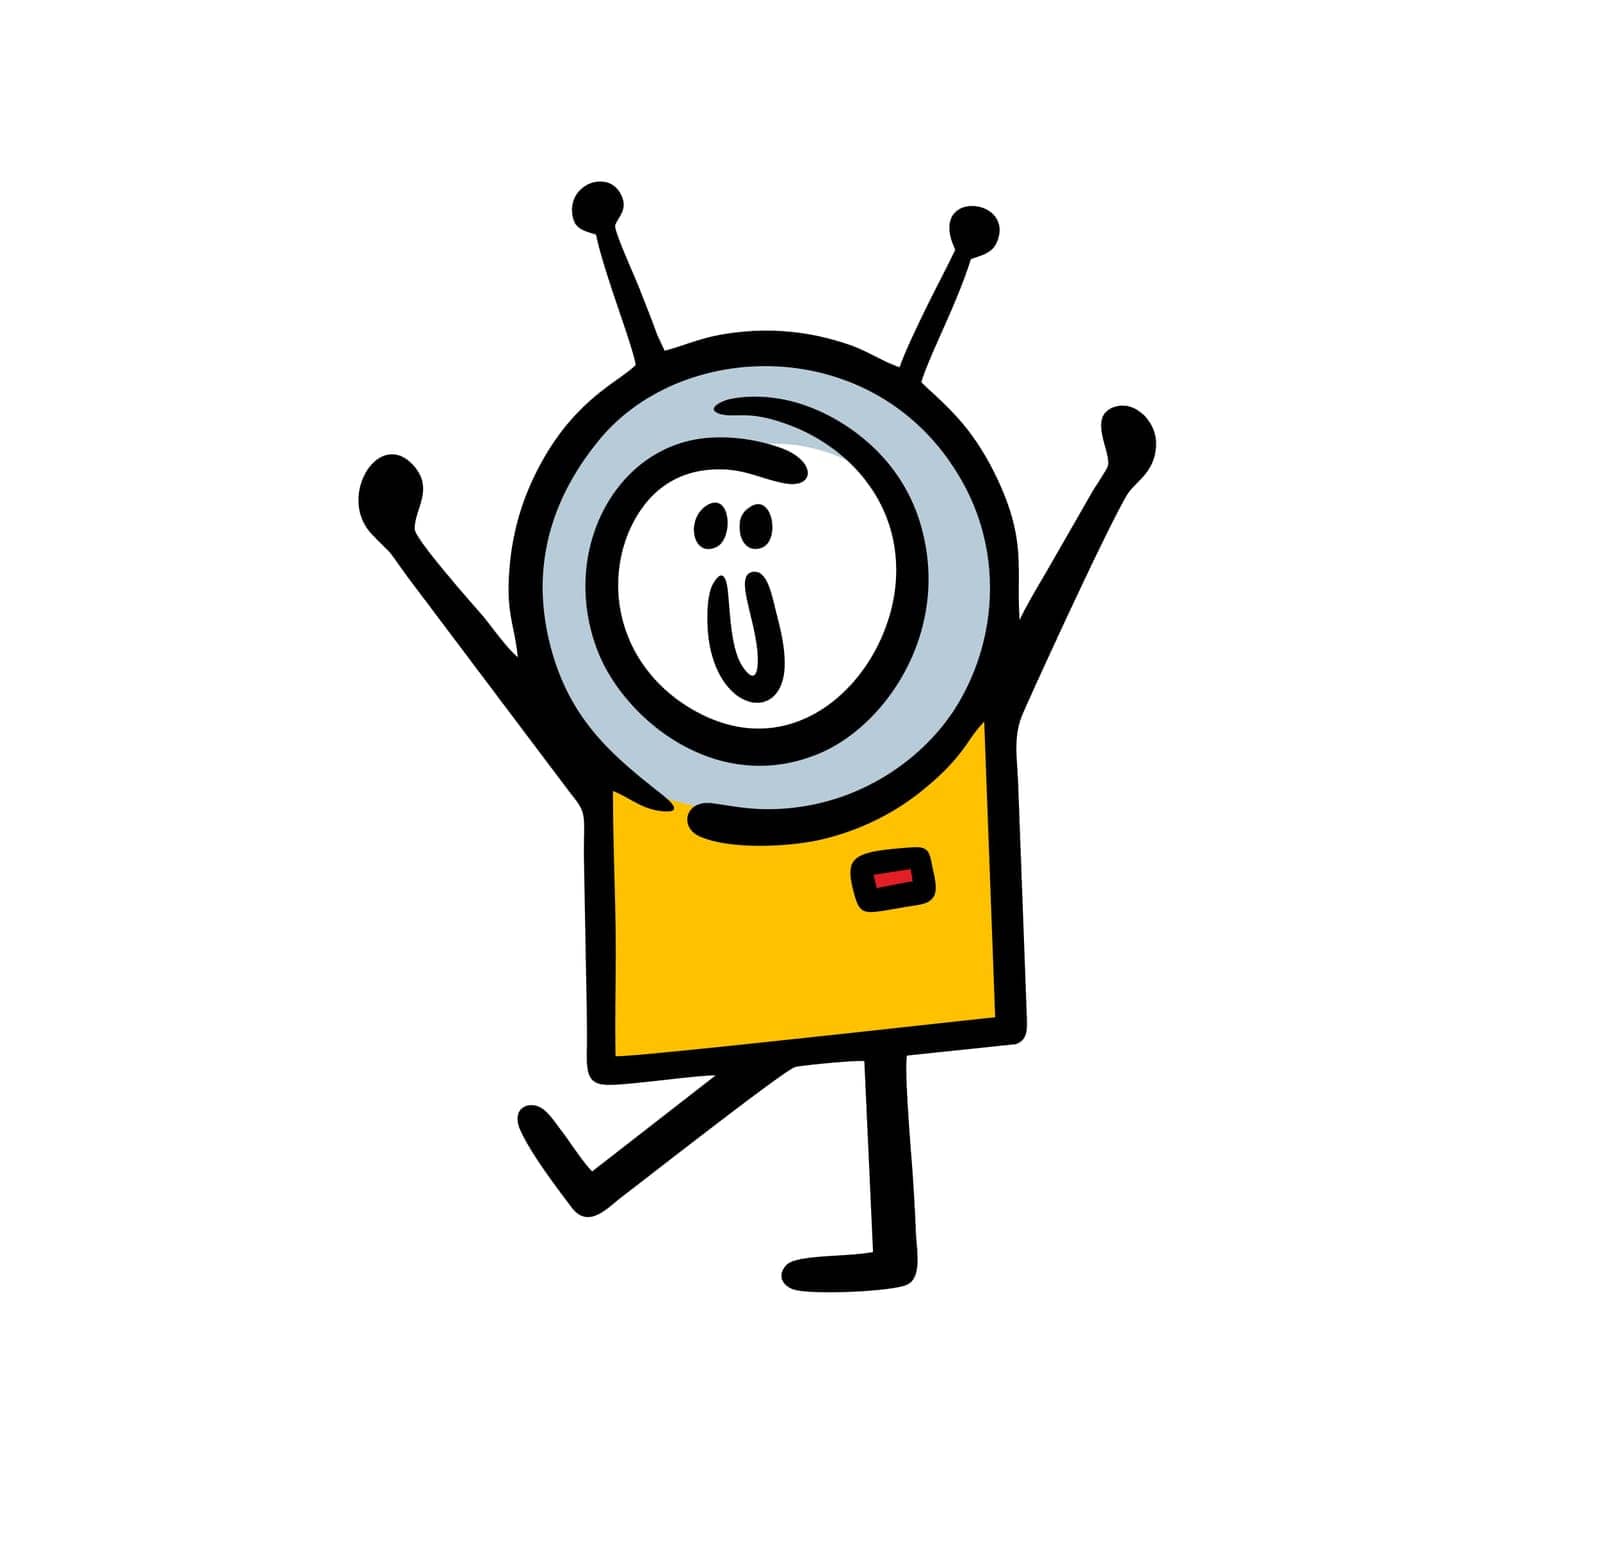 Stick figure astronaut in helmet with antenna and spacesuit walking on the planet. Vector illustration of happy stick figure boy on costume party.